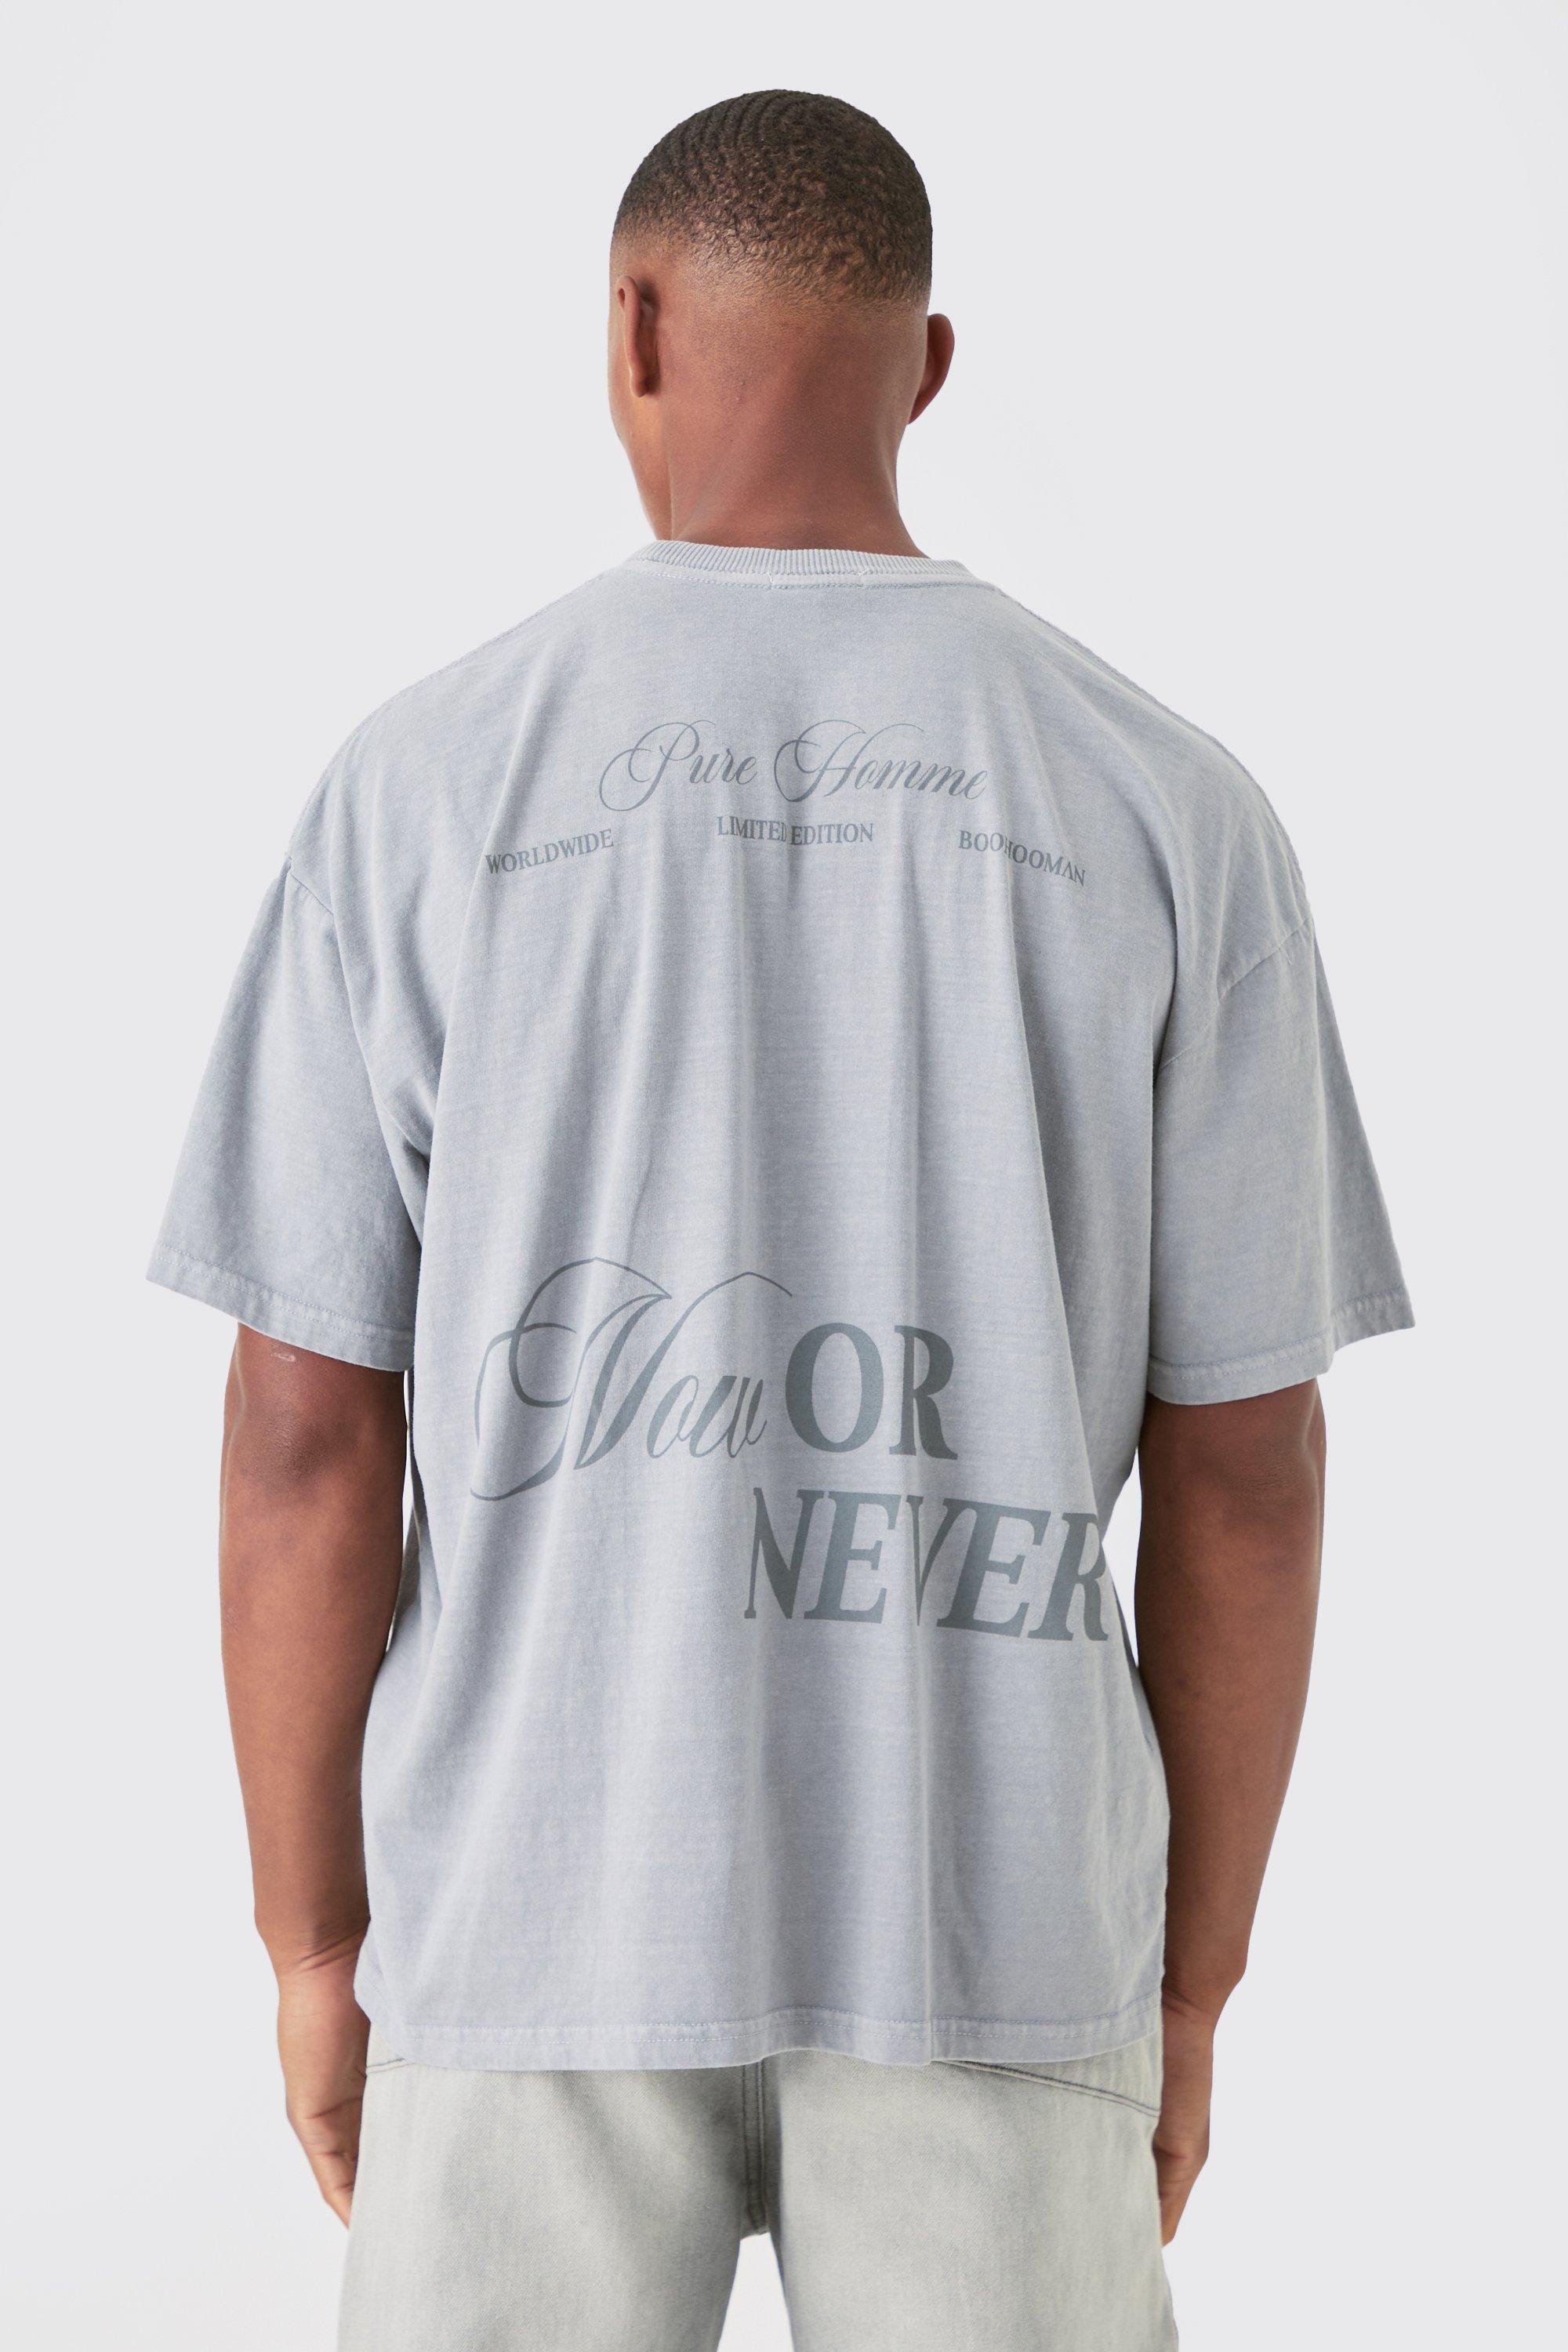 Image of Oversized Now Or Never Washed T-shirt, Grigio